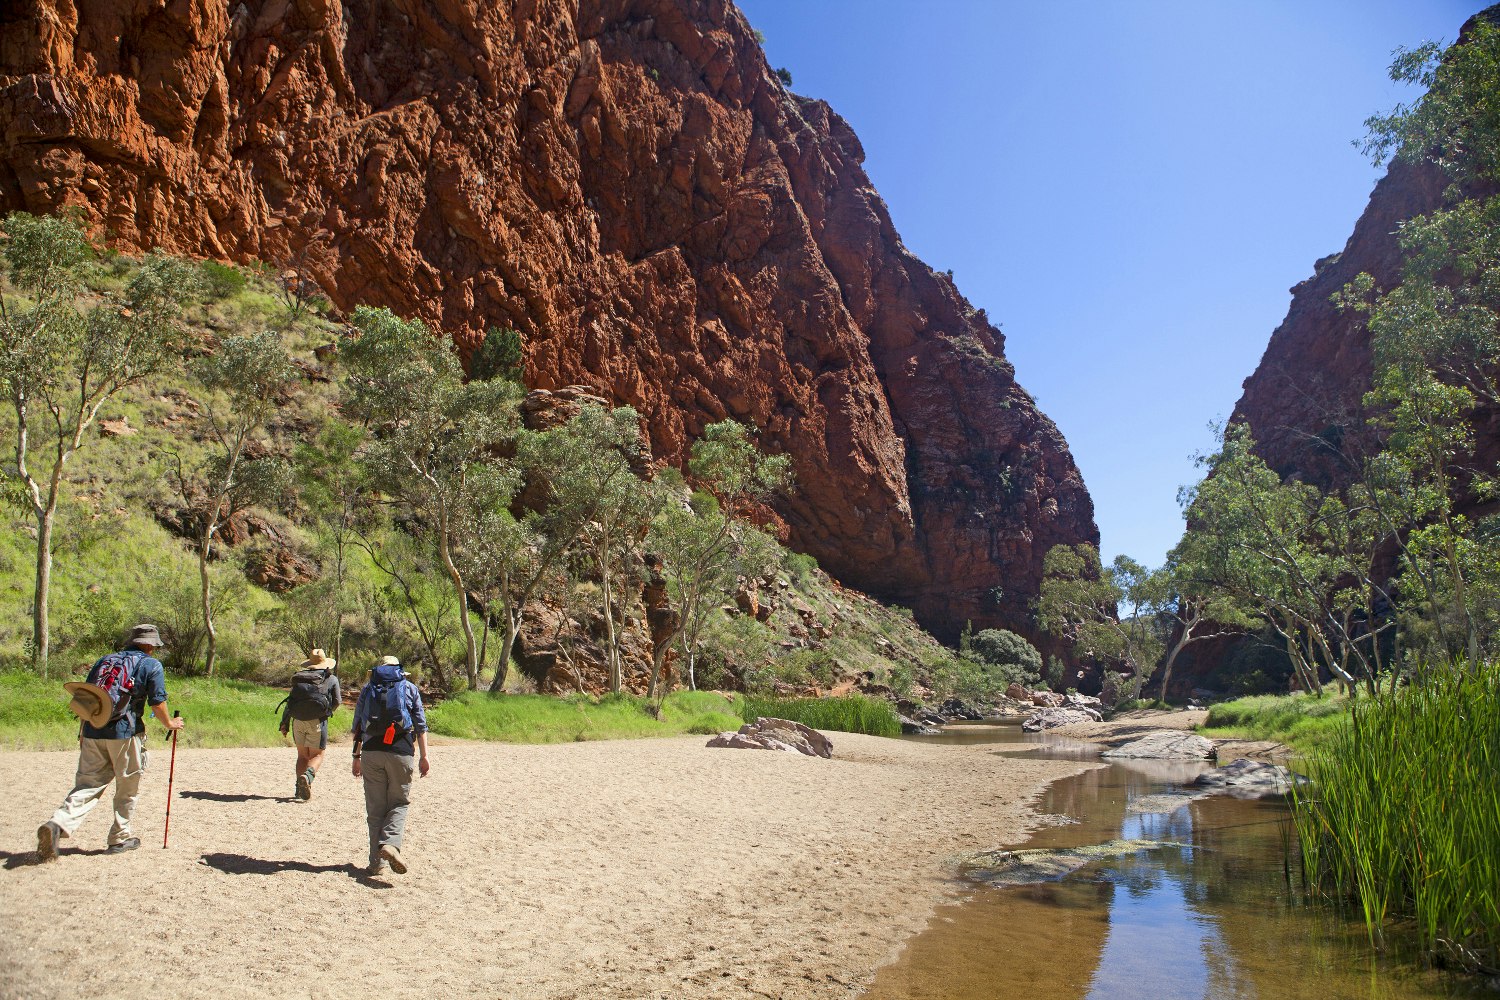 Features - Bushwalkers at Simpsons Gap on the Larapinta Trail